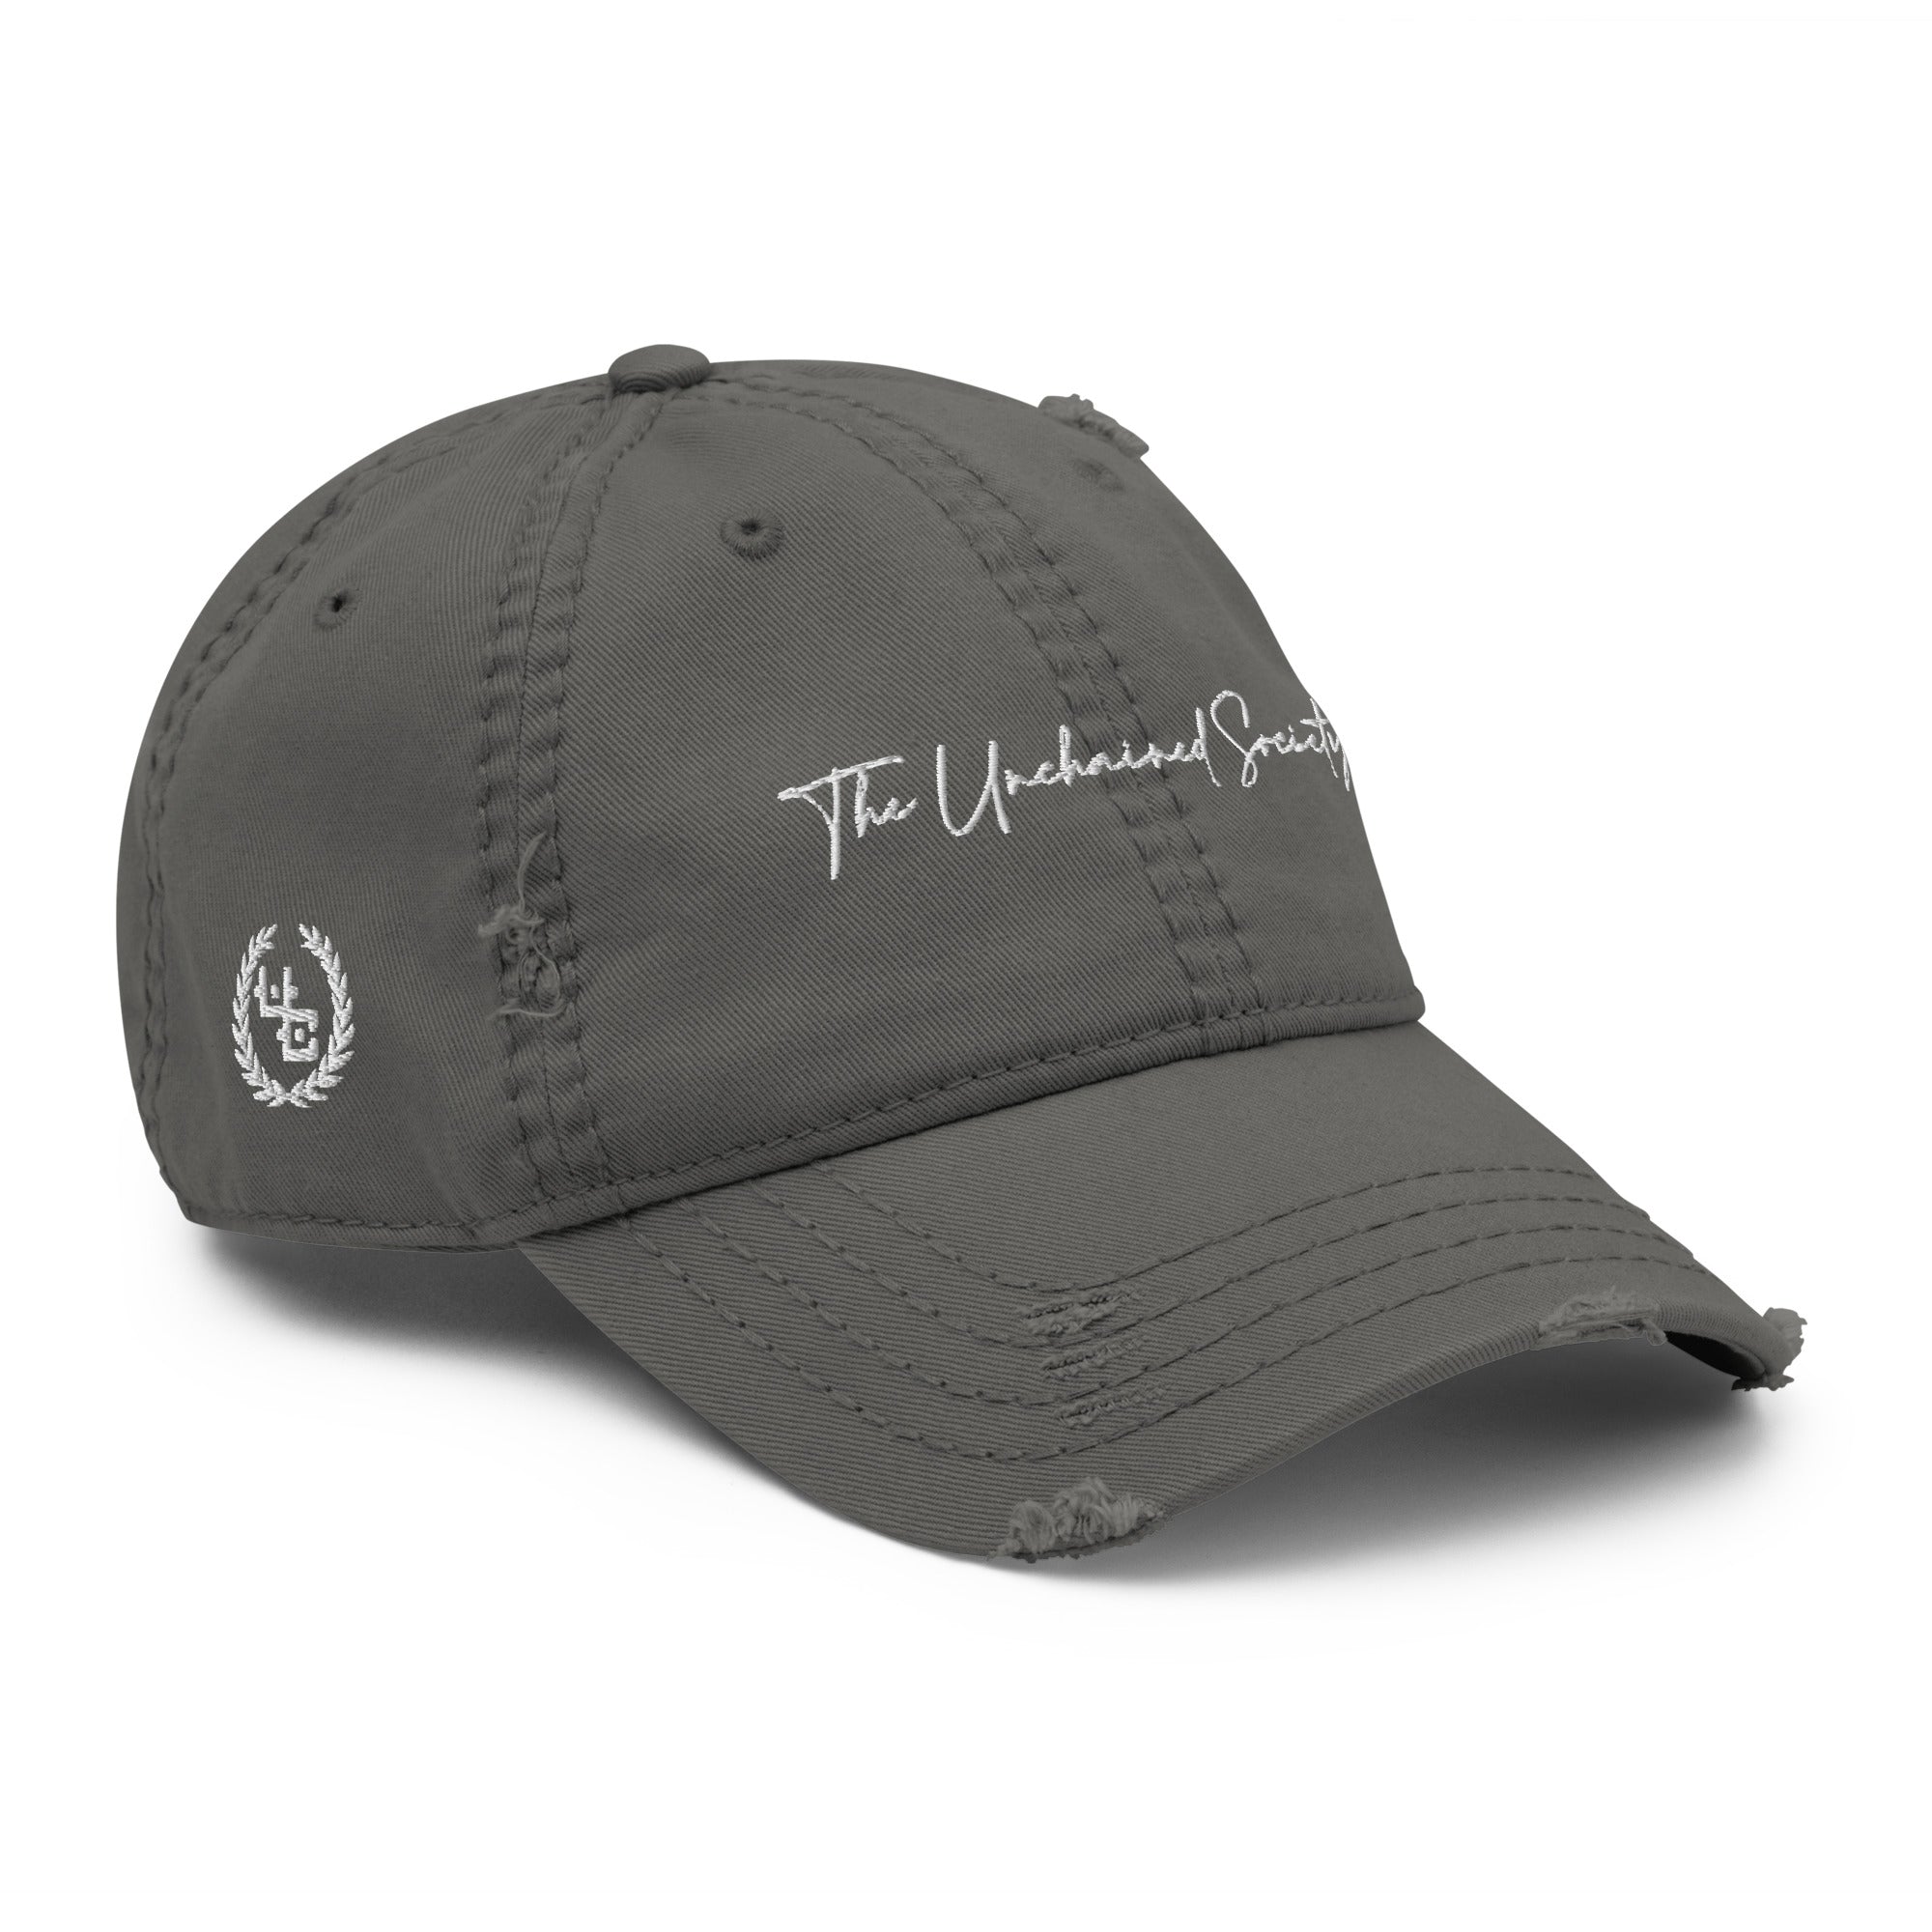 The Unchained Society Distressed Dad Hat